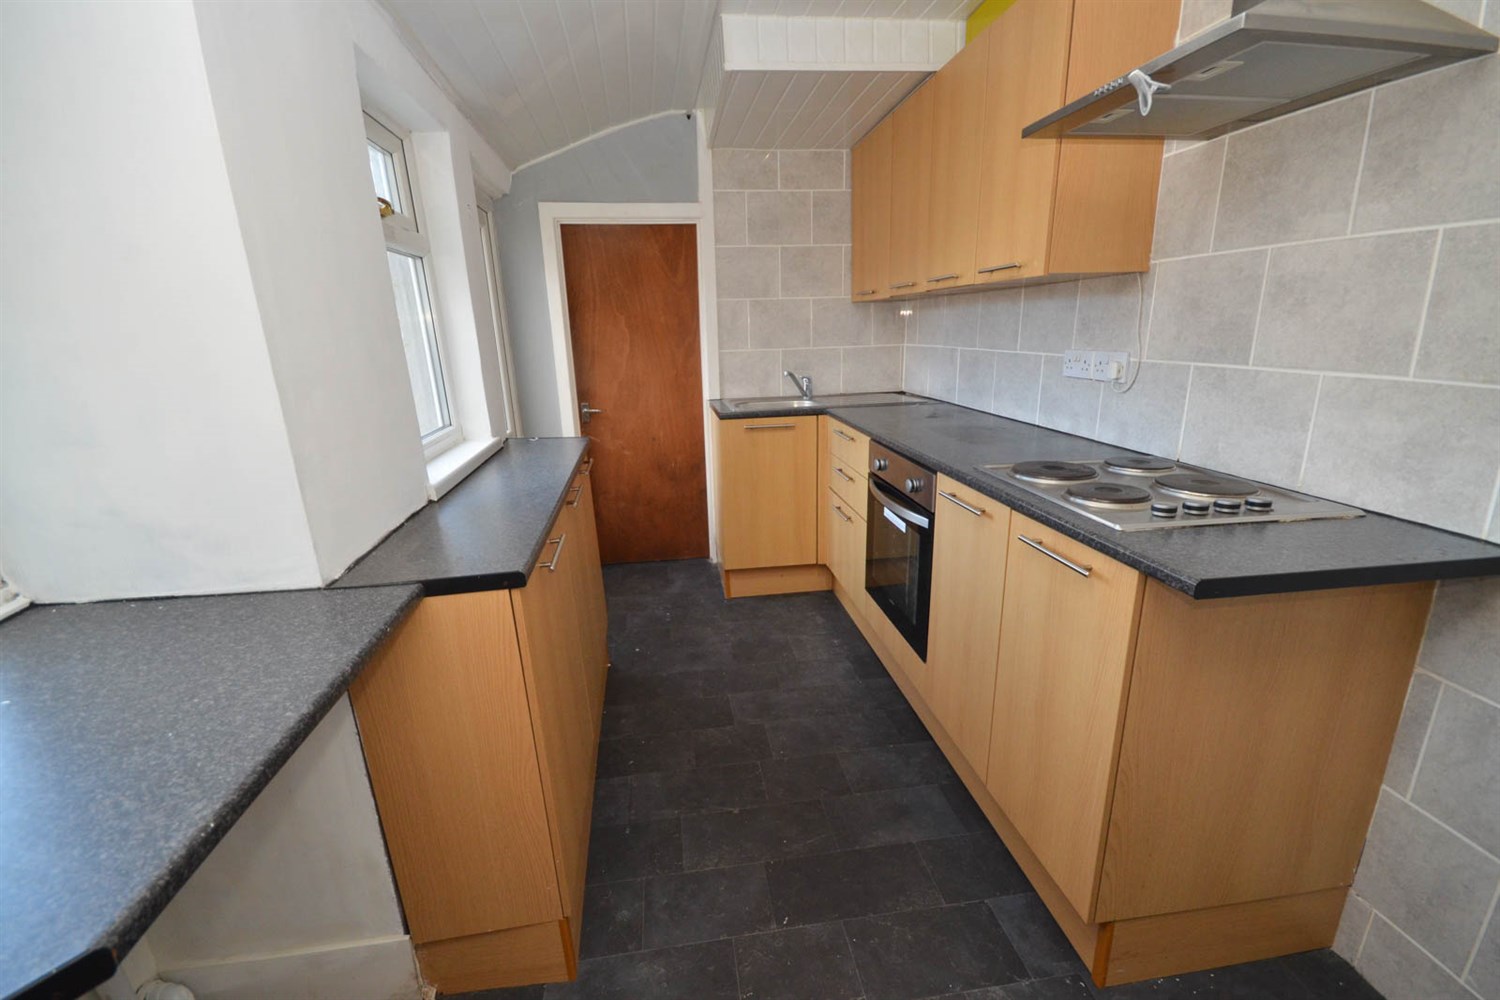 3 bed mid terraced cottage for sale in Willmore Street, Sunderland  - Property Image 2